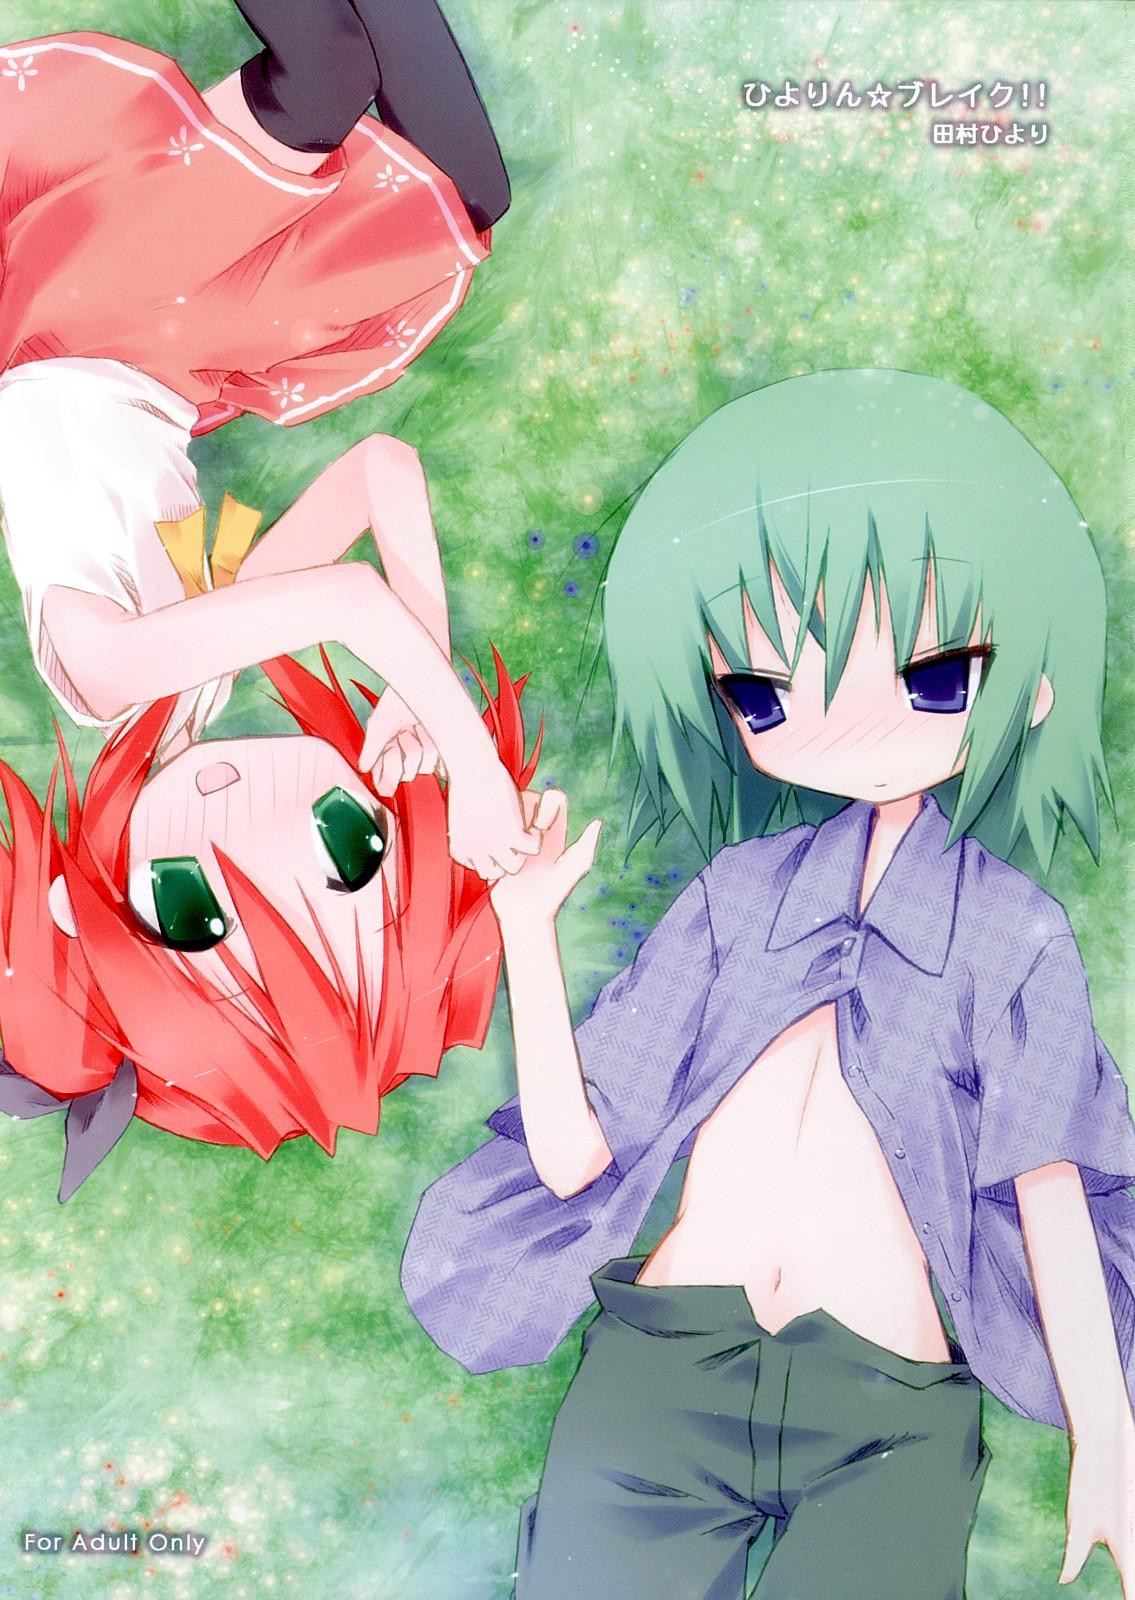 Strapon Hiyorin Break!! - Lucky star Clothed - Picture 1